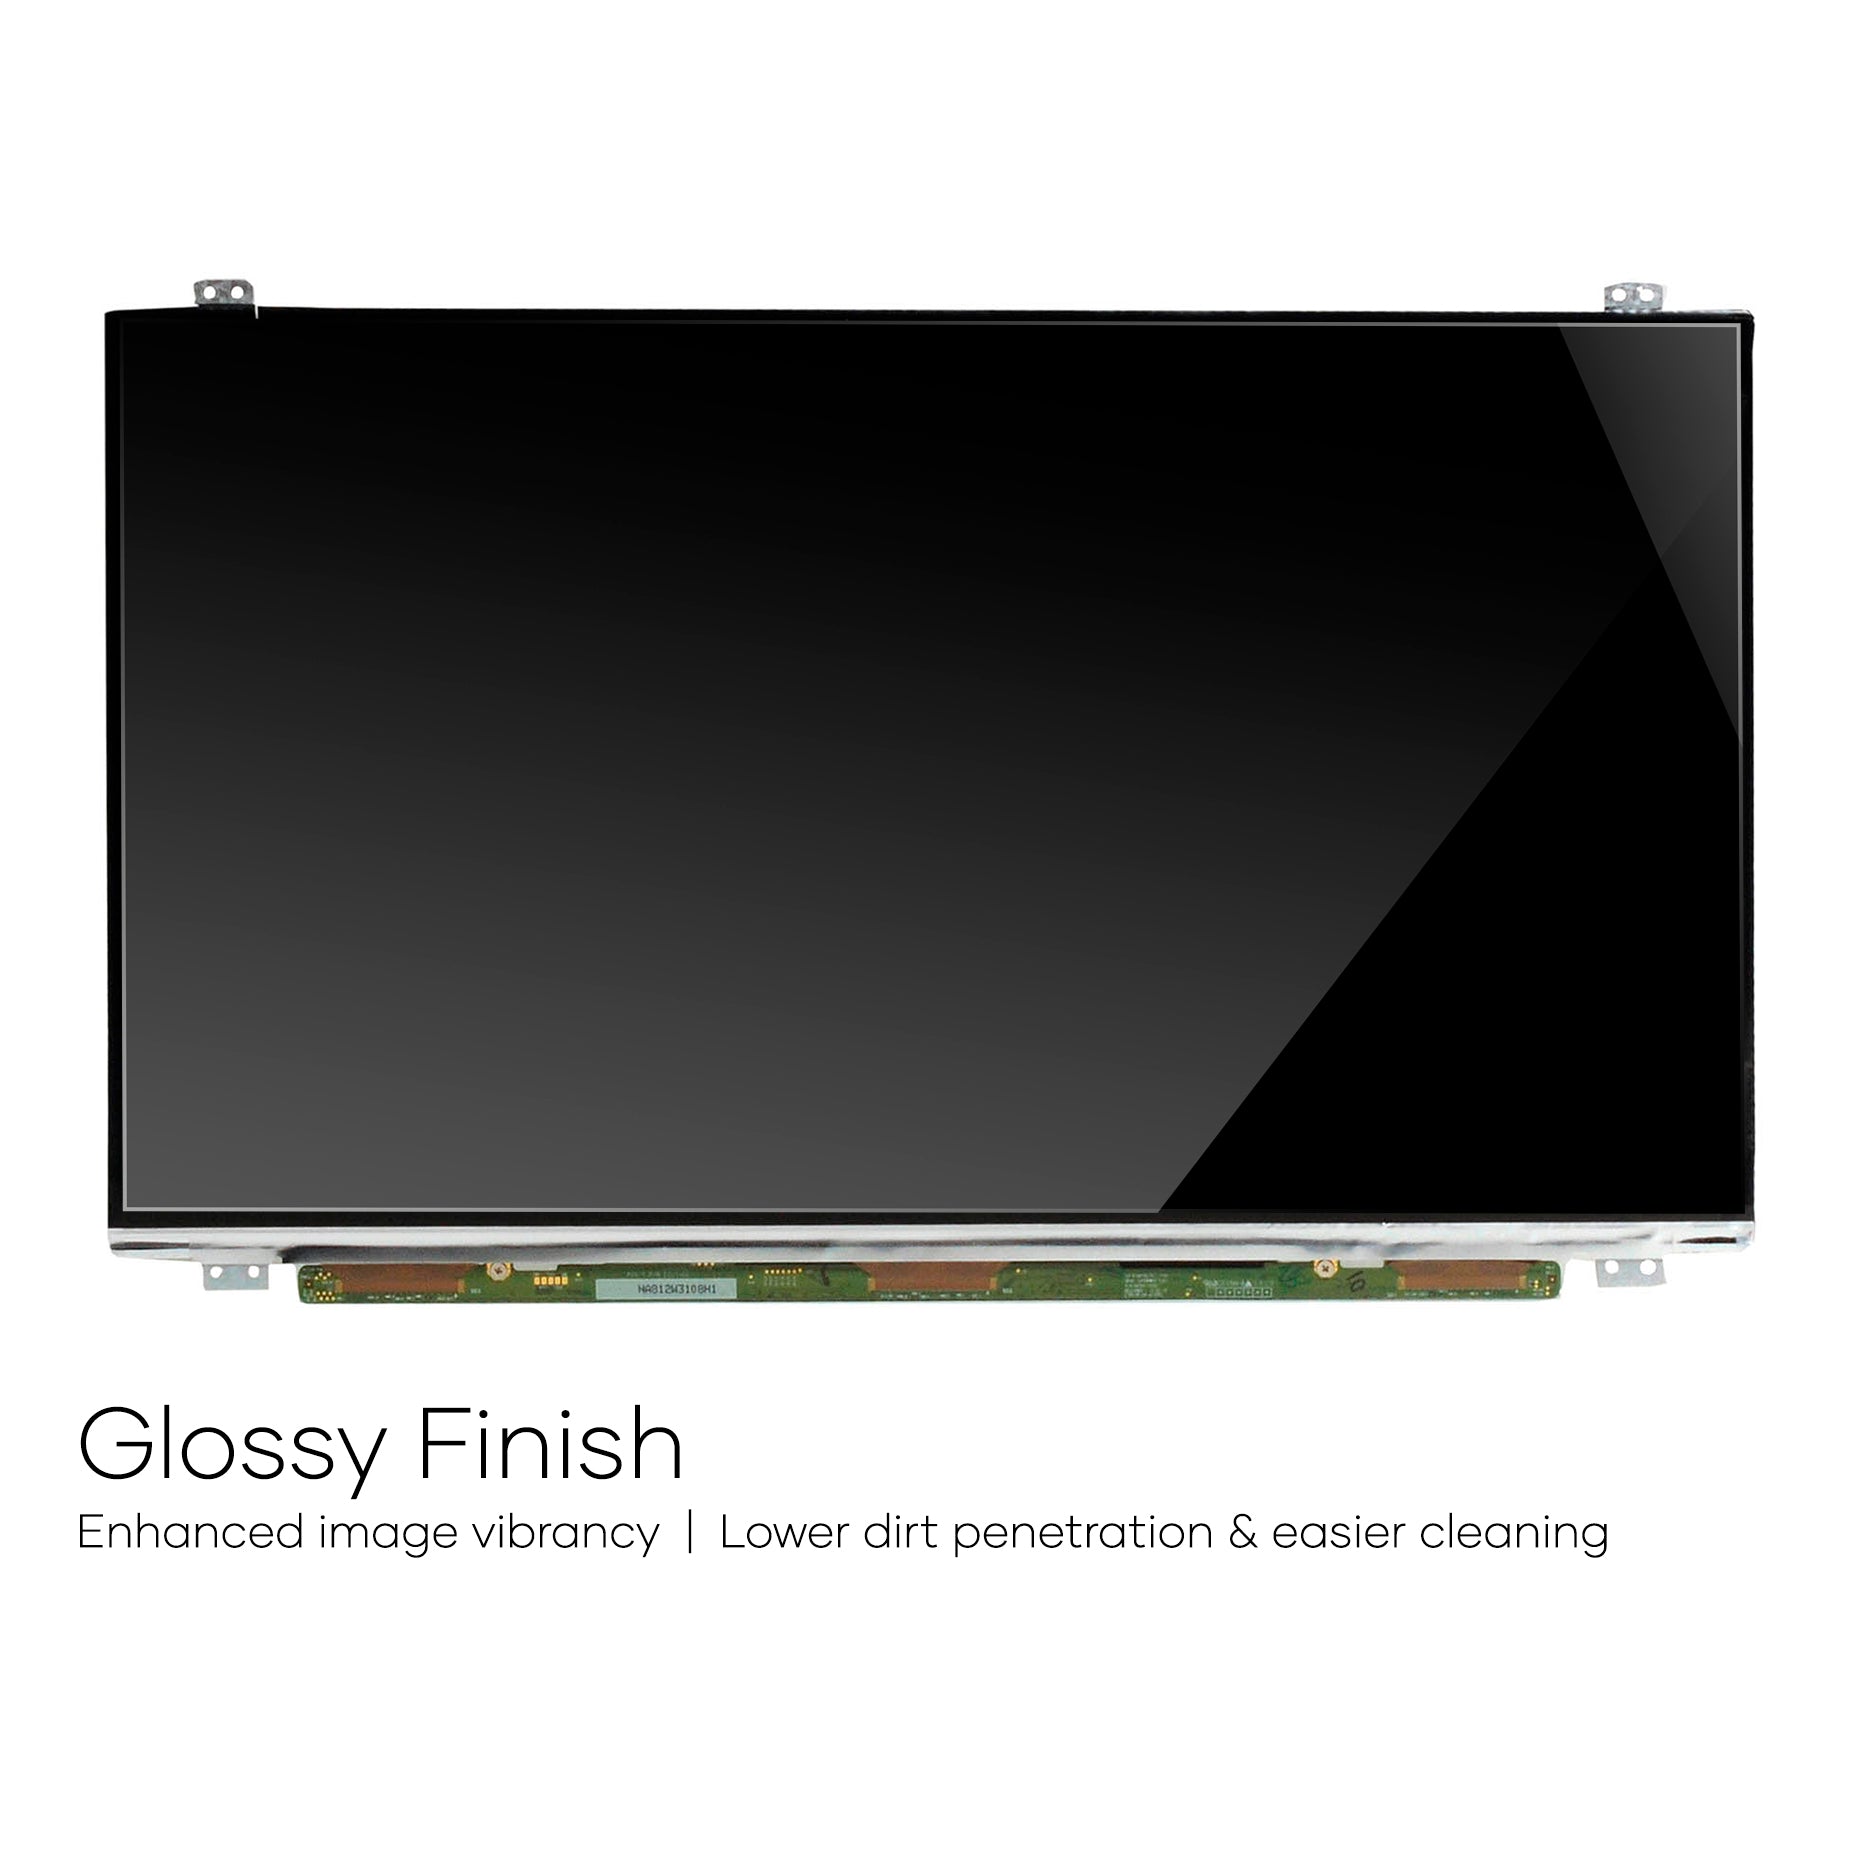 Replacement Screen For LTN156AR33-001 HD 1366x768 Glossy LCD LED Display